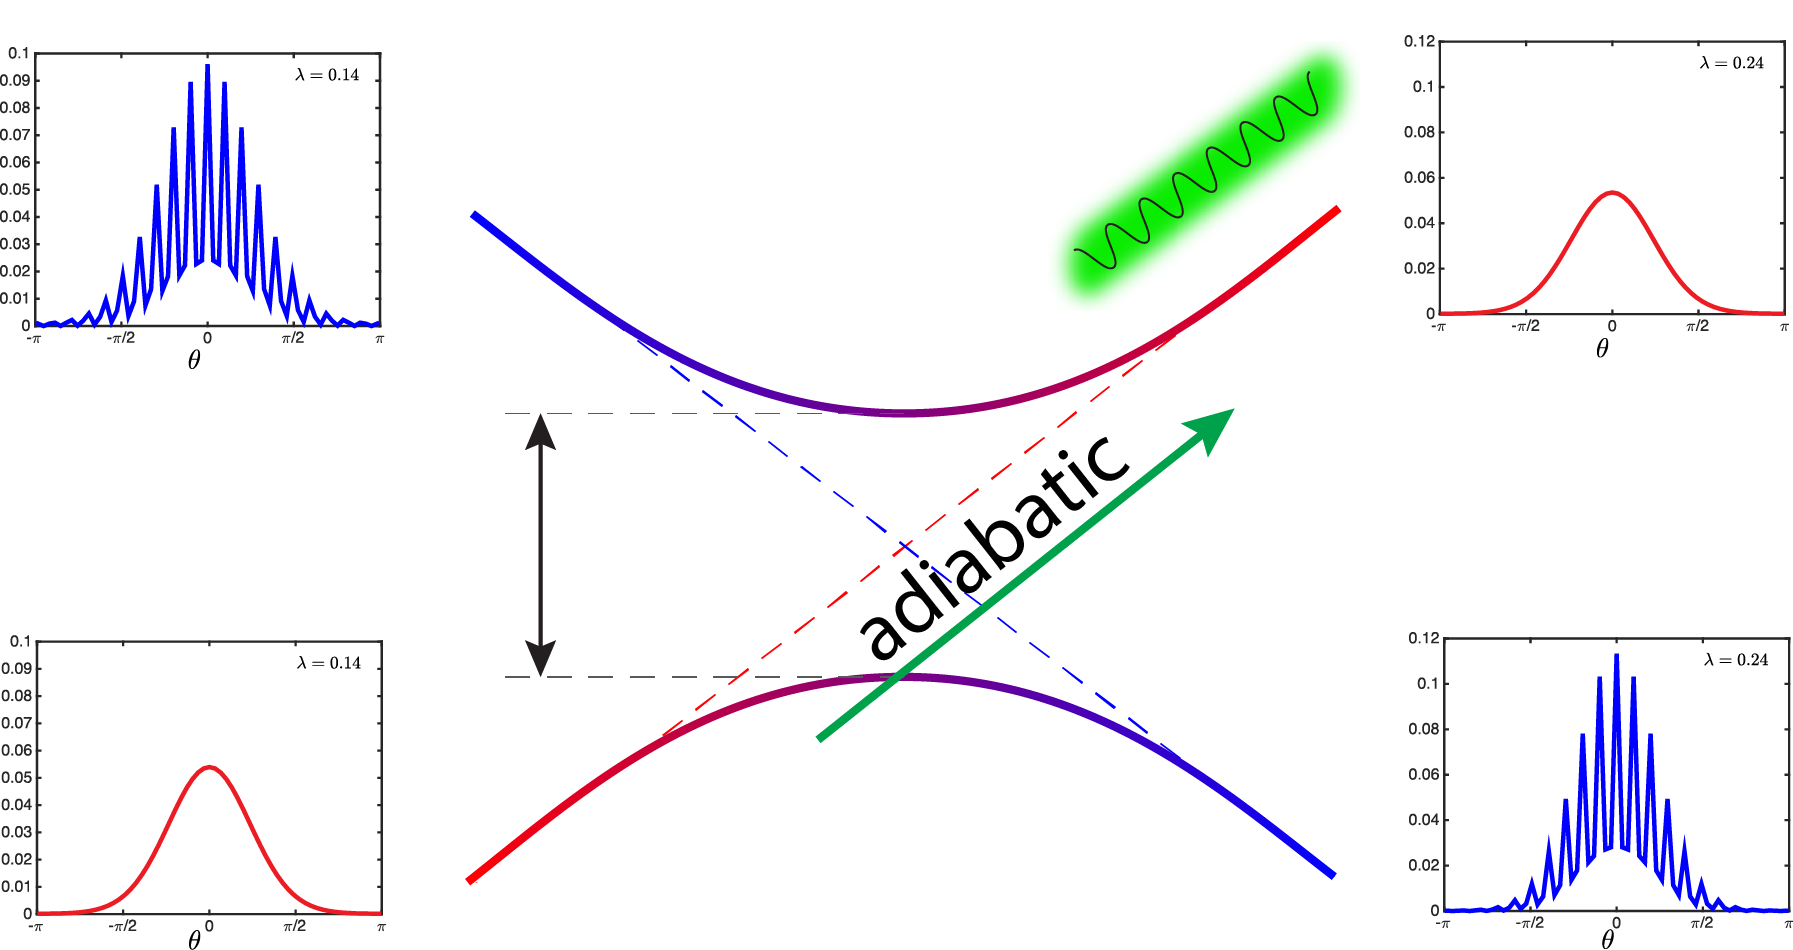 <i>Adiabatic passage through a photon absorption avoided crossing in the quasienergy spectrum of the Kapitza pendulum. The ground state (red) is hybridized with a higher-energy state (blue) close to the crossing [8].</i>